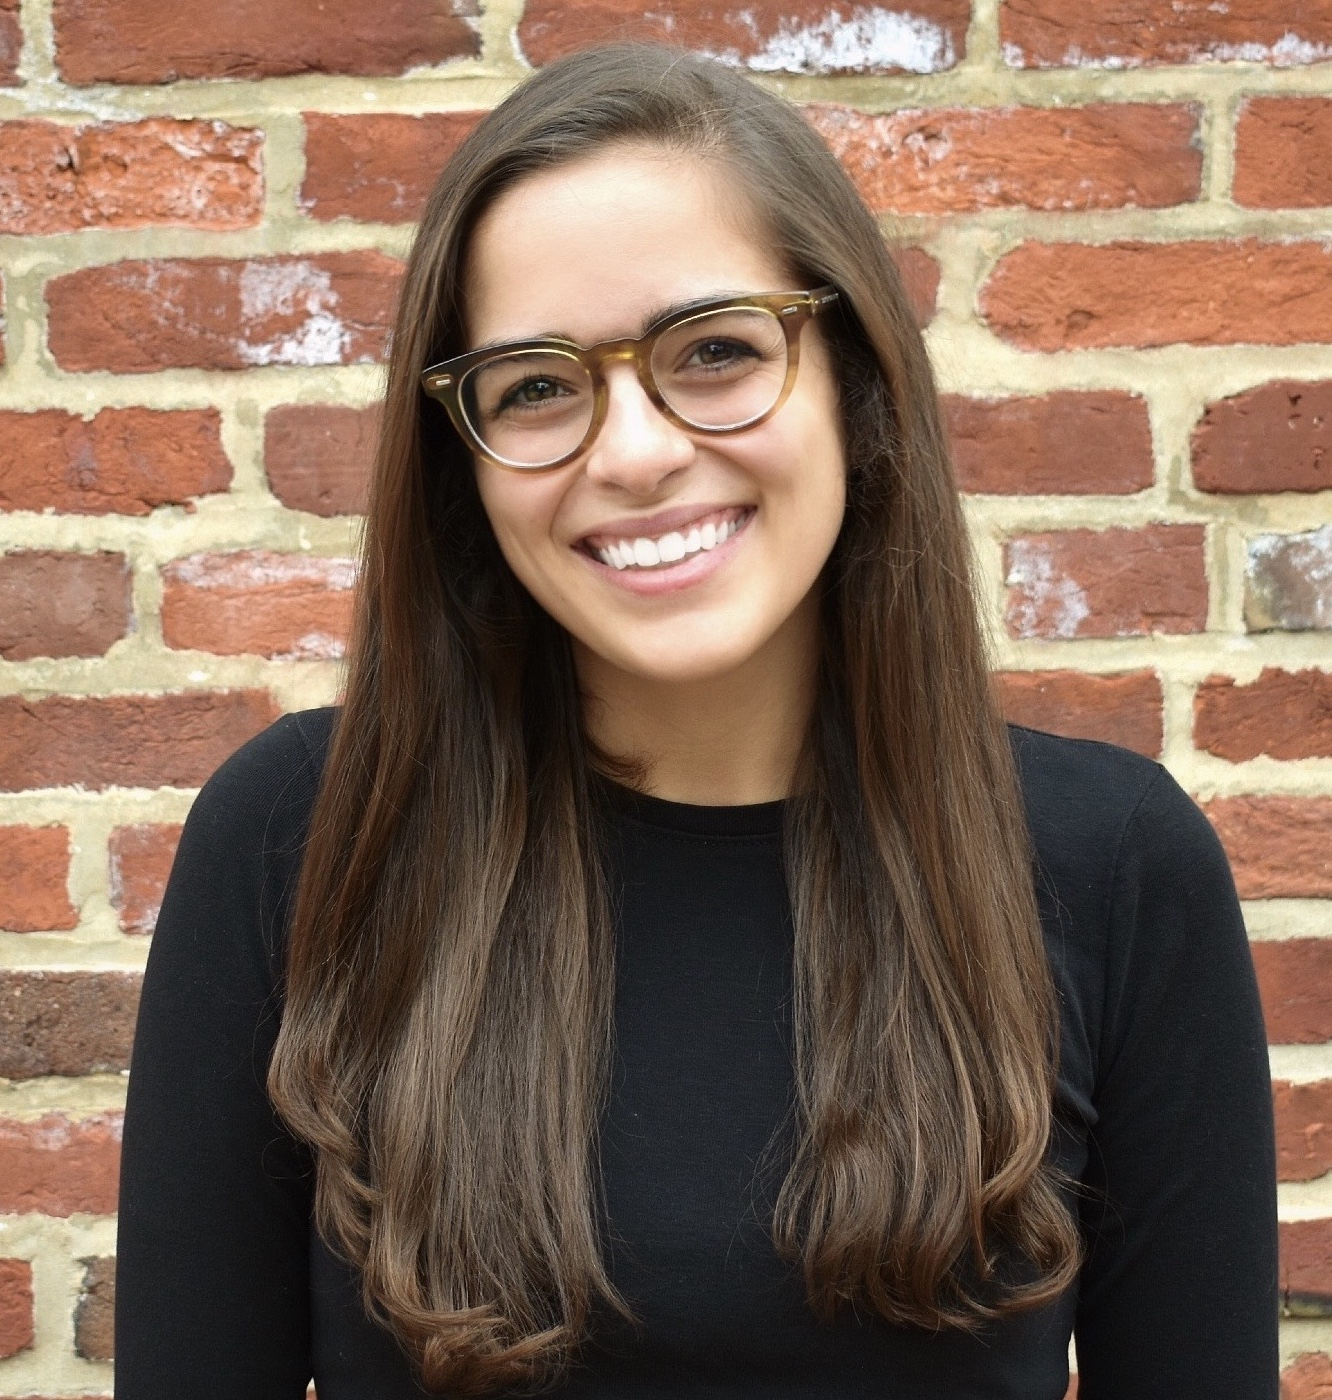 This is a color photograph of a smiling woman in front of a red brick wall. She has long brown hair and is wearing glasses and a black shirt.